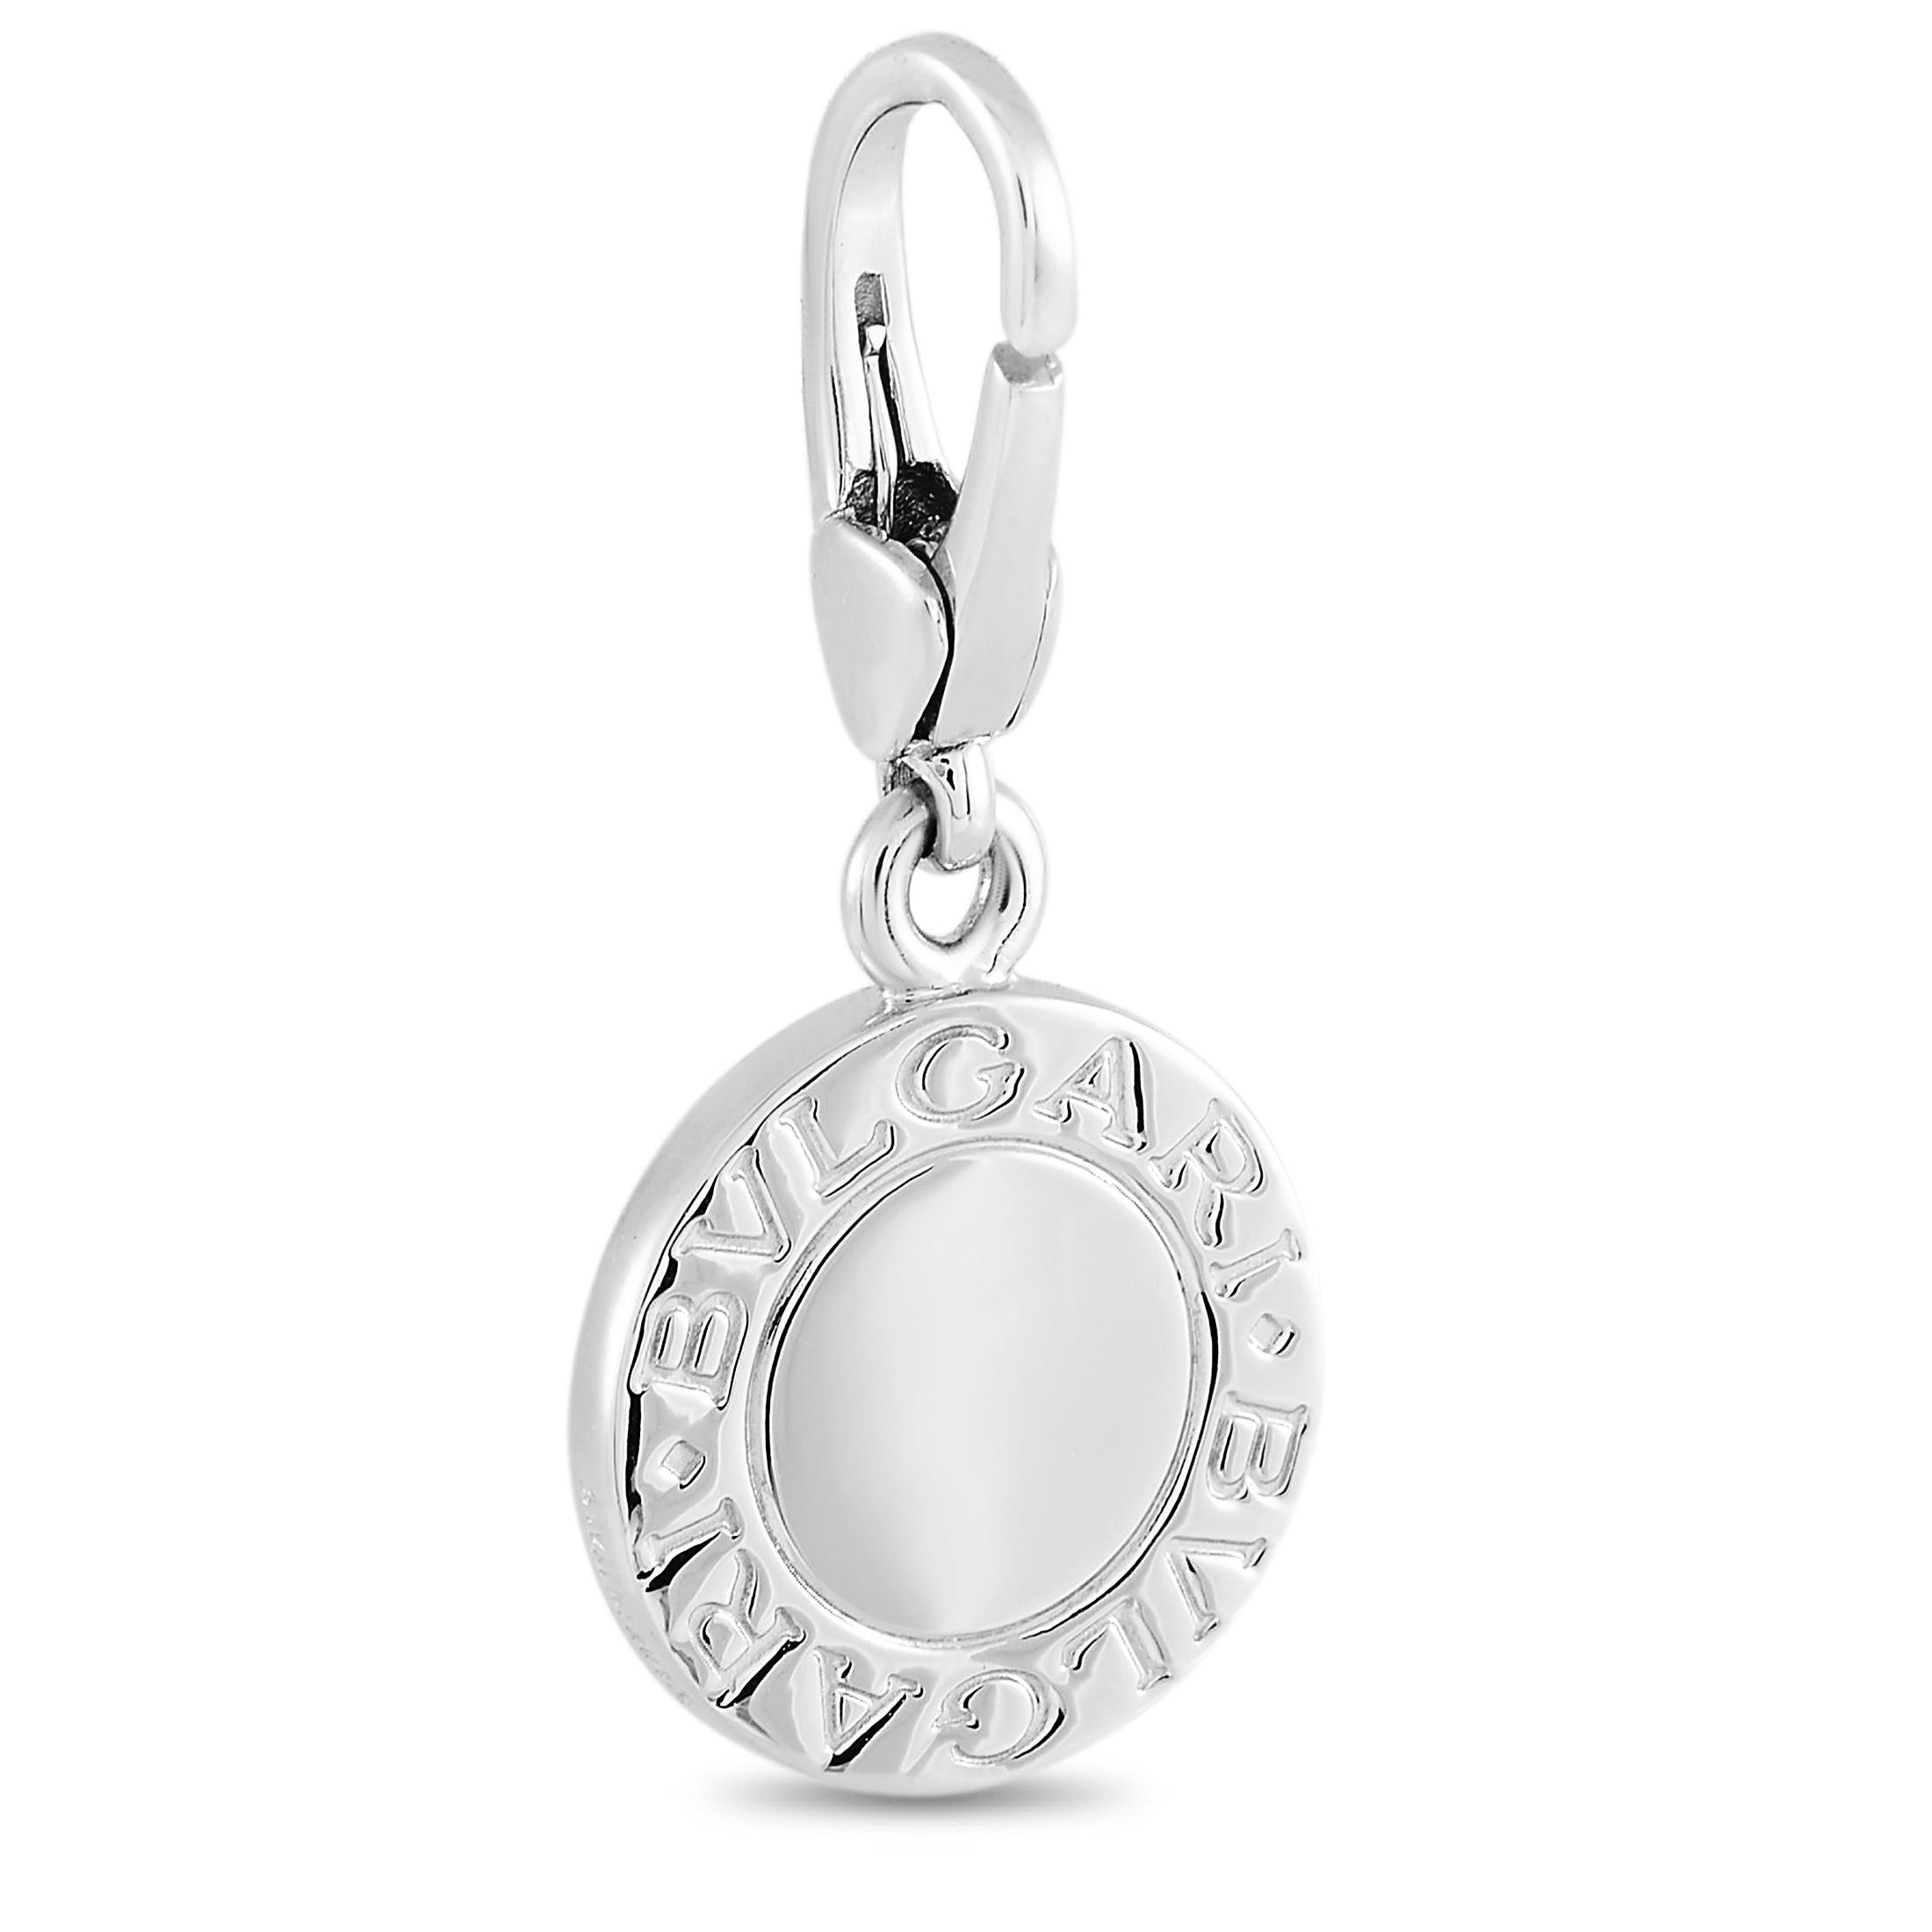 This Bvlgari 18K White Gold Charm is a must have! The pendant is made from 18K white gold and is set with a flat blue stone in the center. The pendant features the Bvlgari brand name along the outer edge on both sides. The pendant measures 1.15